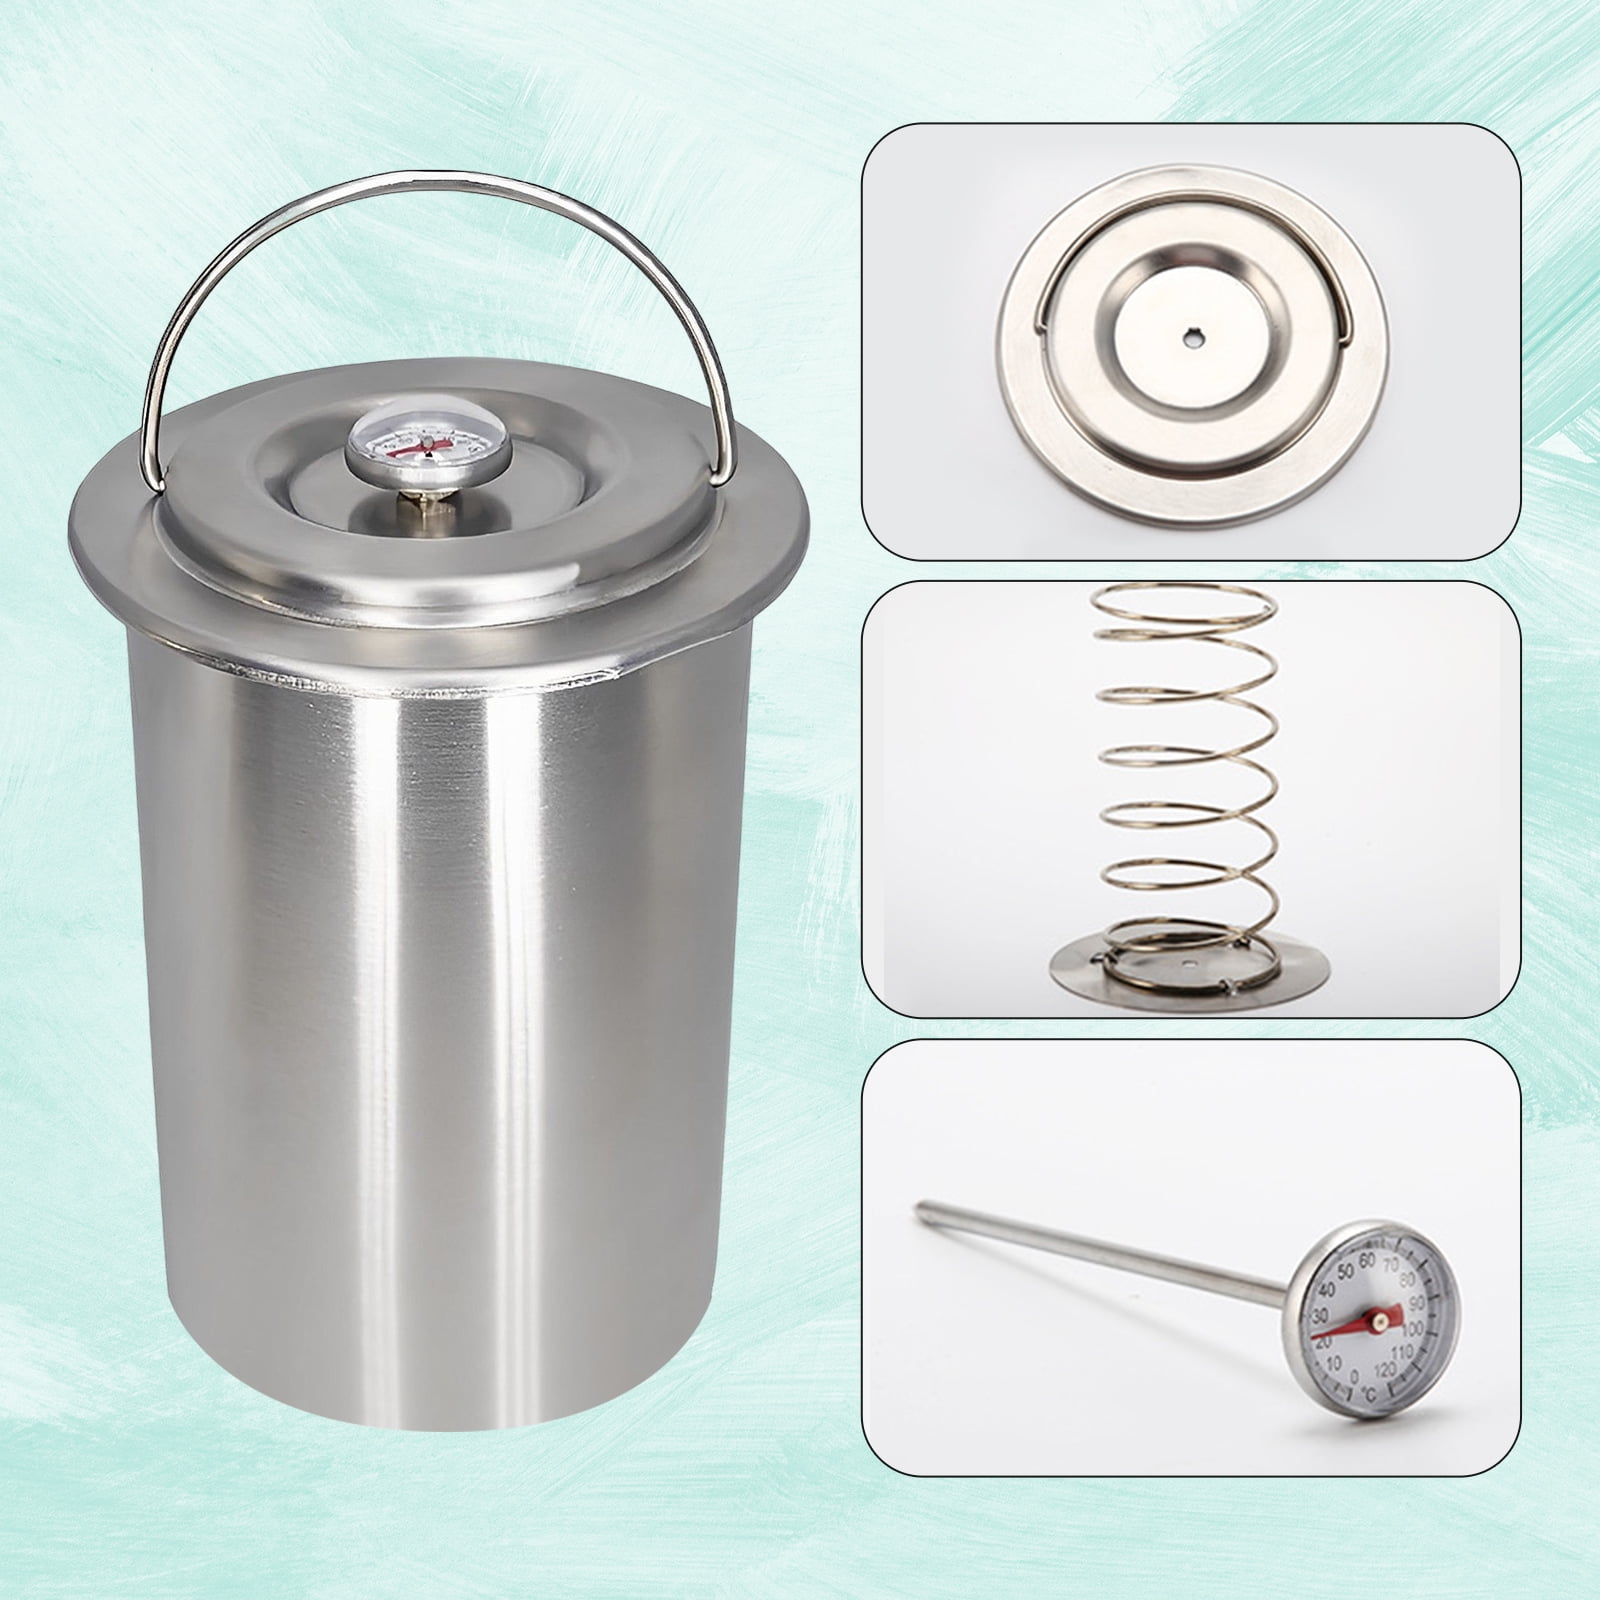 Meat Poultry Tools Cooking Barrel Stainless Steel With Temperature Monitor  Steamer Ham Press Maker Kitchen Tool 230712 From Youngstore10, $27.78